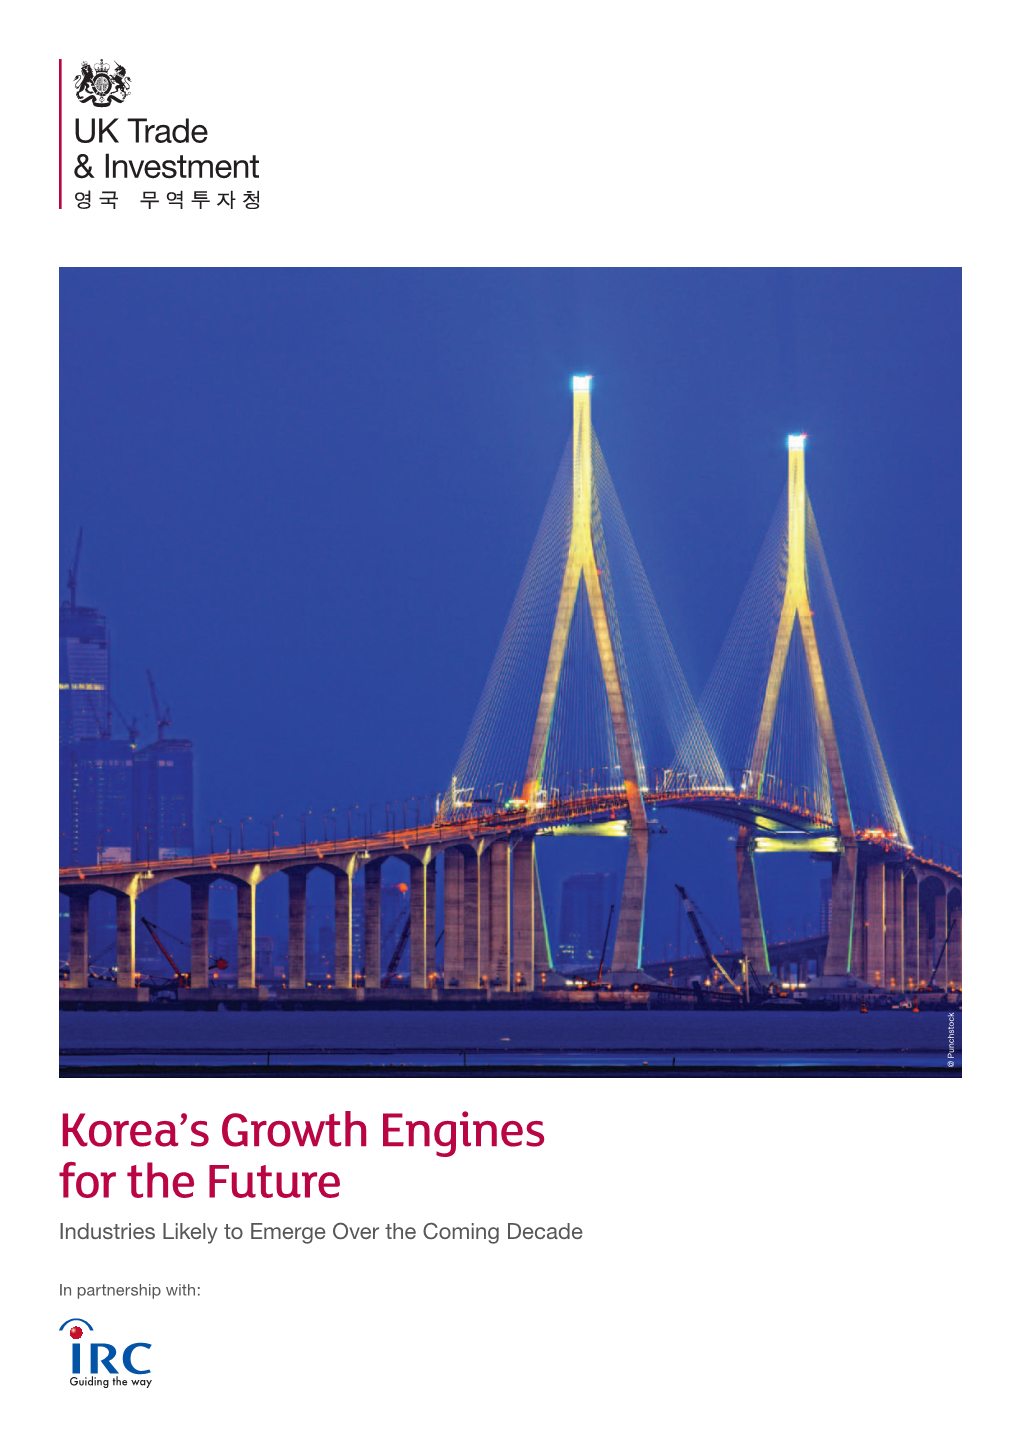 Korea's Growth Engines for the Future